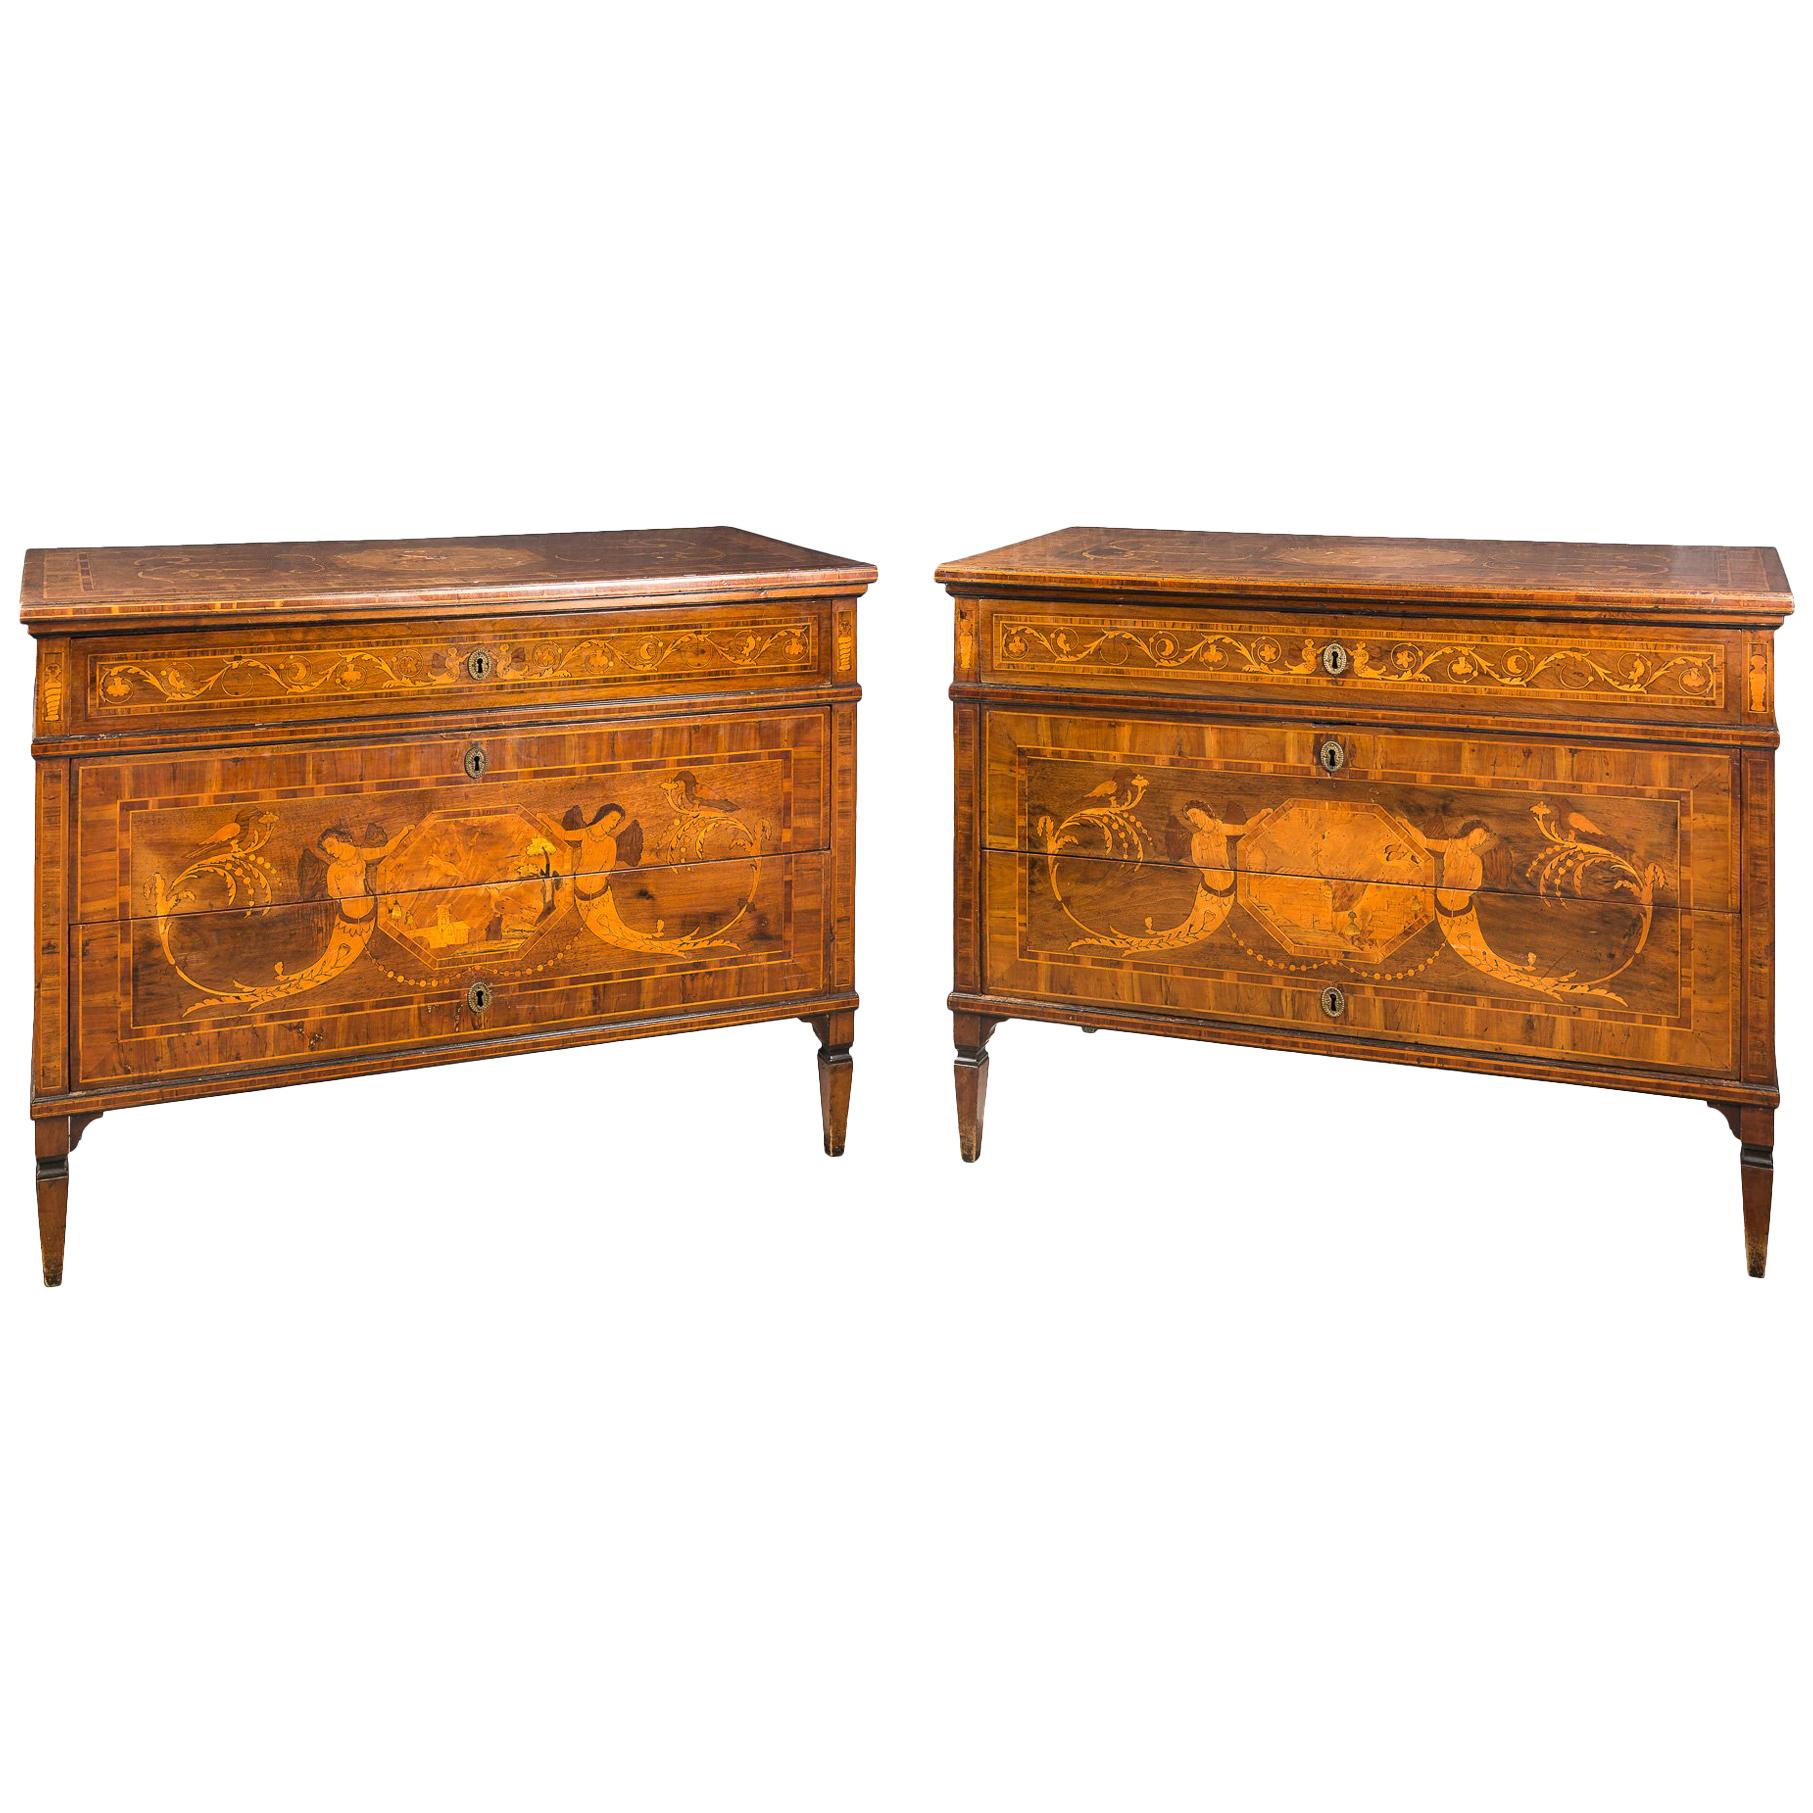 Pair of Wooden Commodes Inlaid in Soft Woods, Piacenza, 18th Century